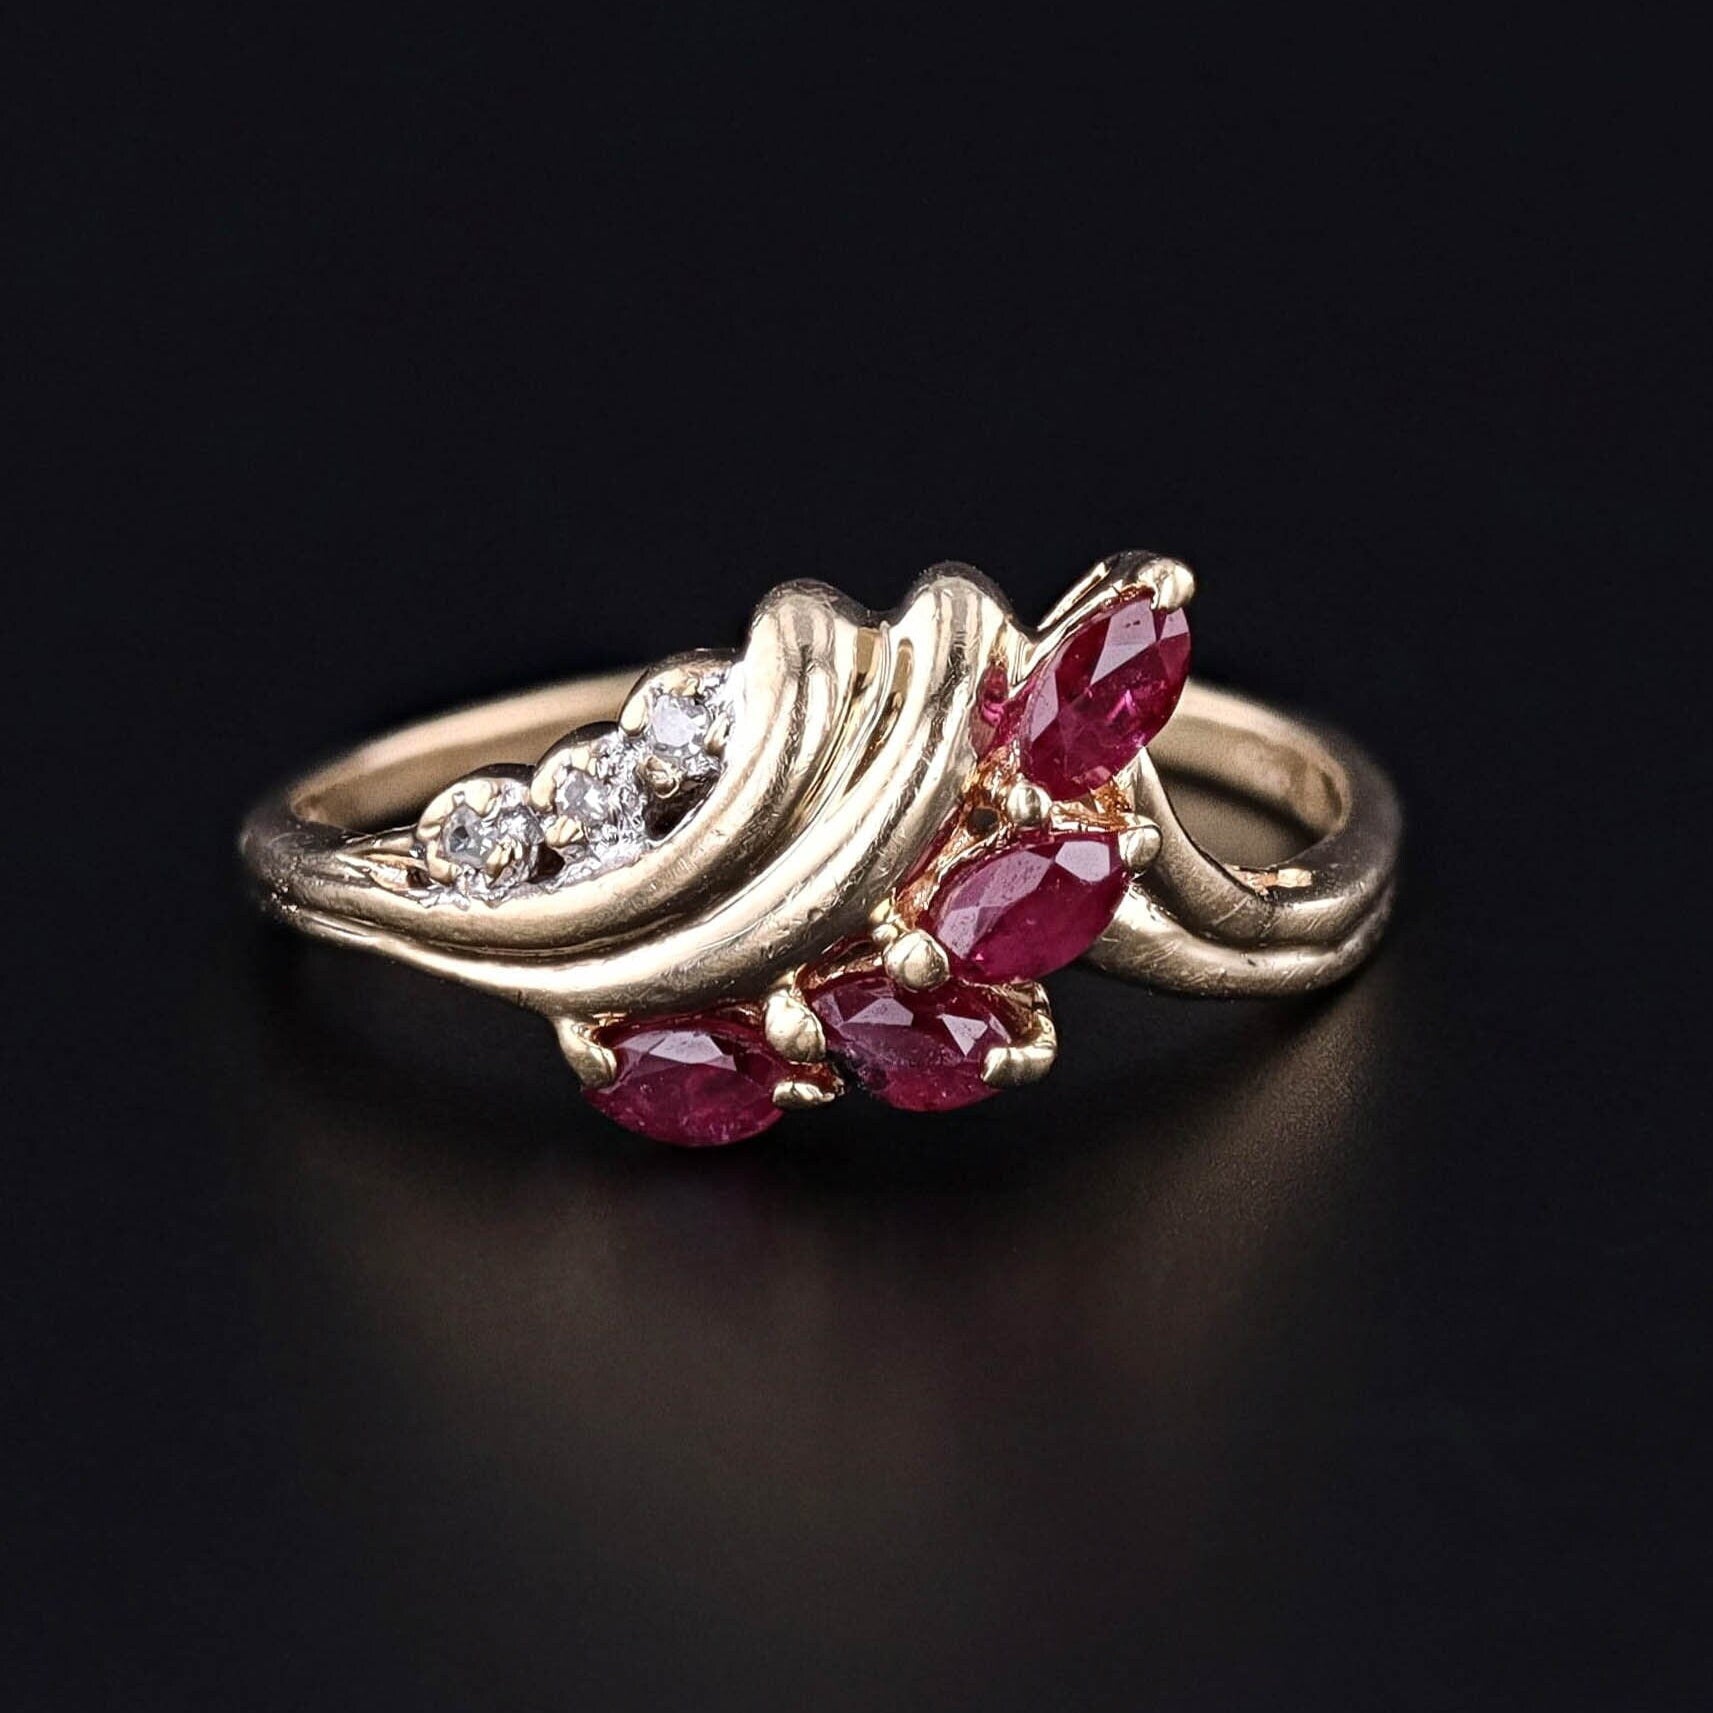 Vintage Ruby and Diamond Ring of 14k Gold